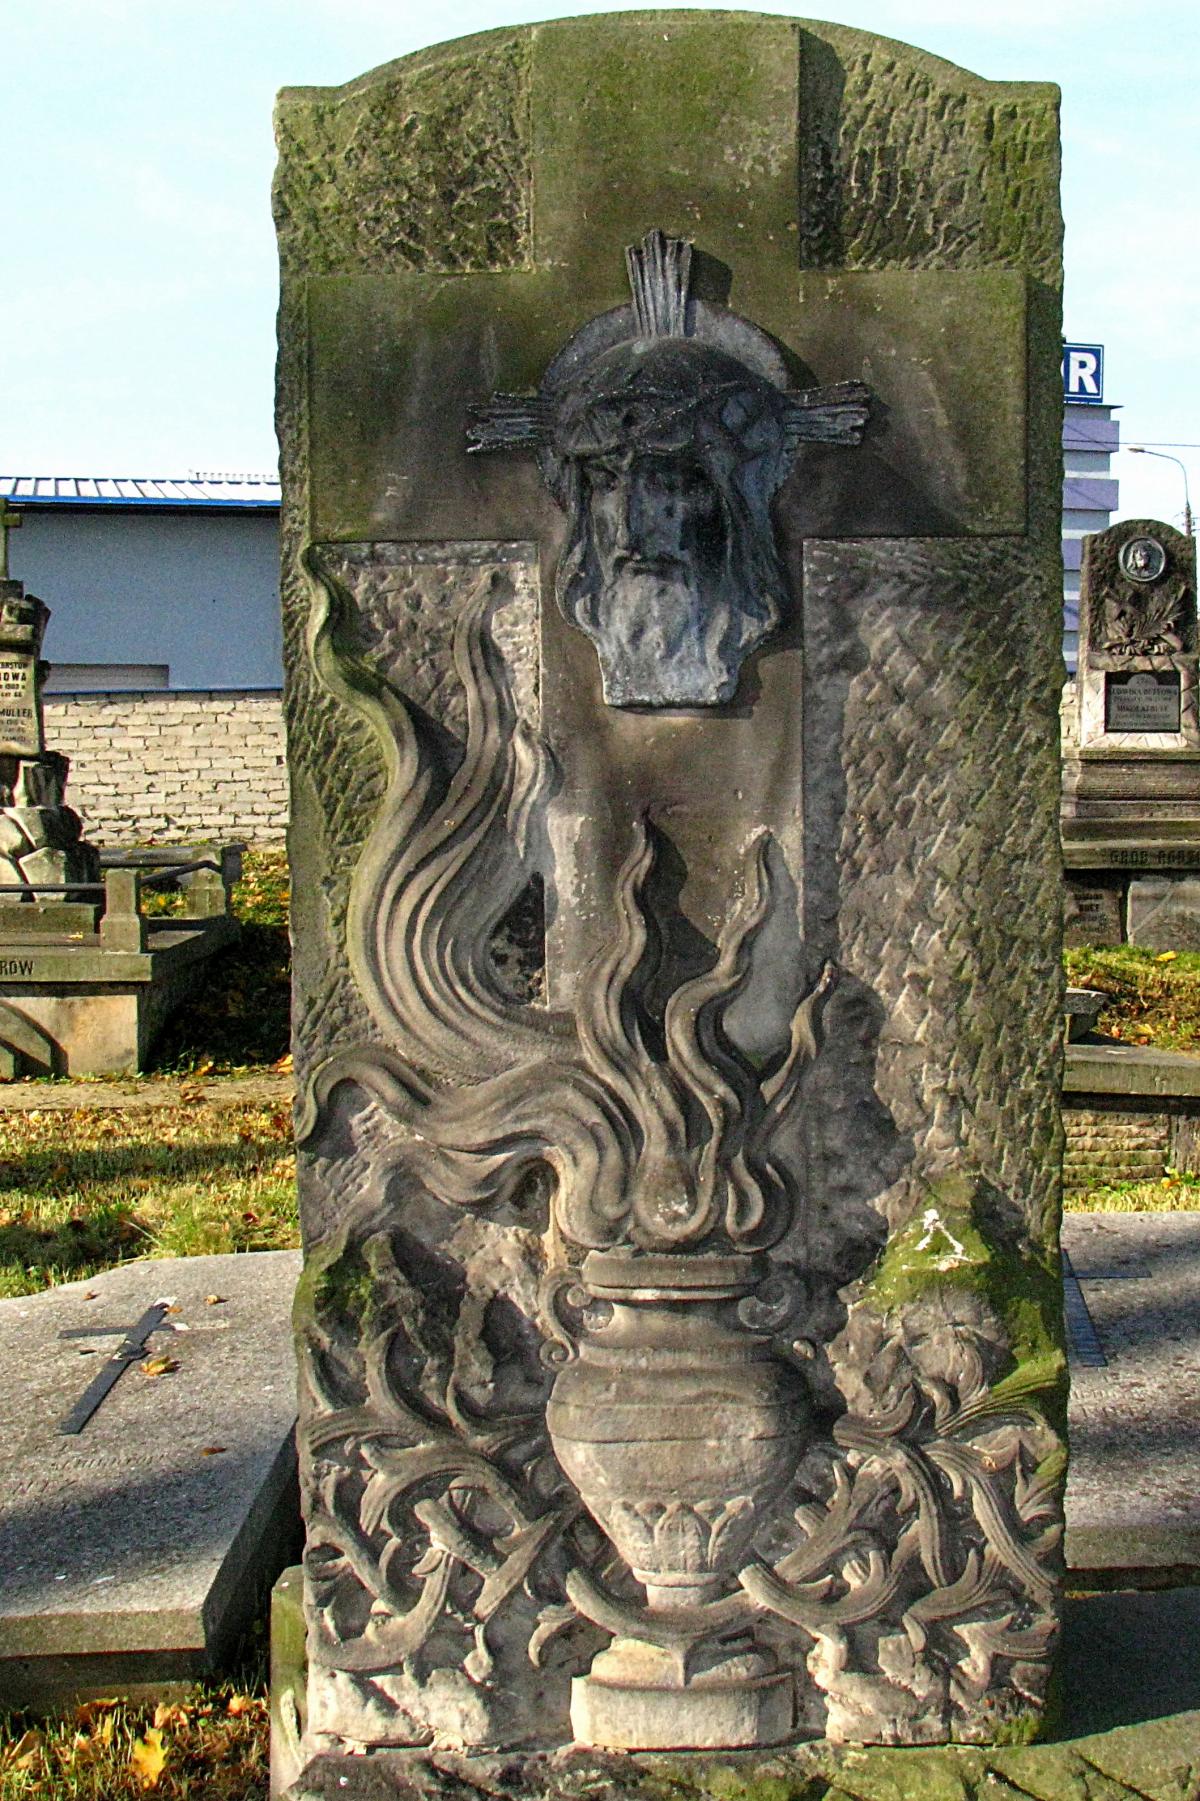 Wikipedia, Evangelical-Augsburg Cemetery in Radom, Images from Wiki Loves Monuments 2012, Images fro